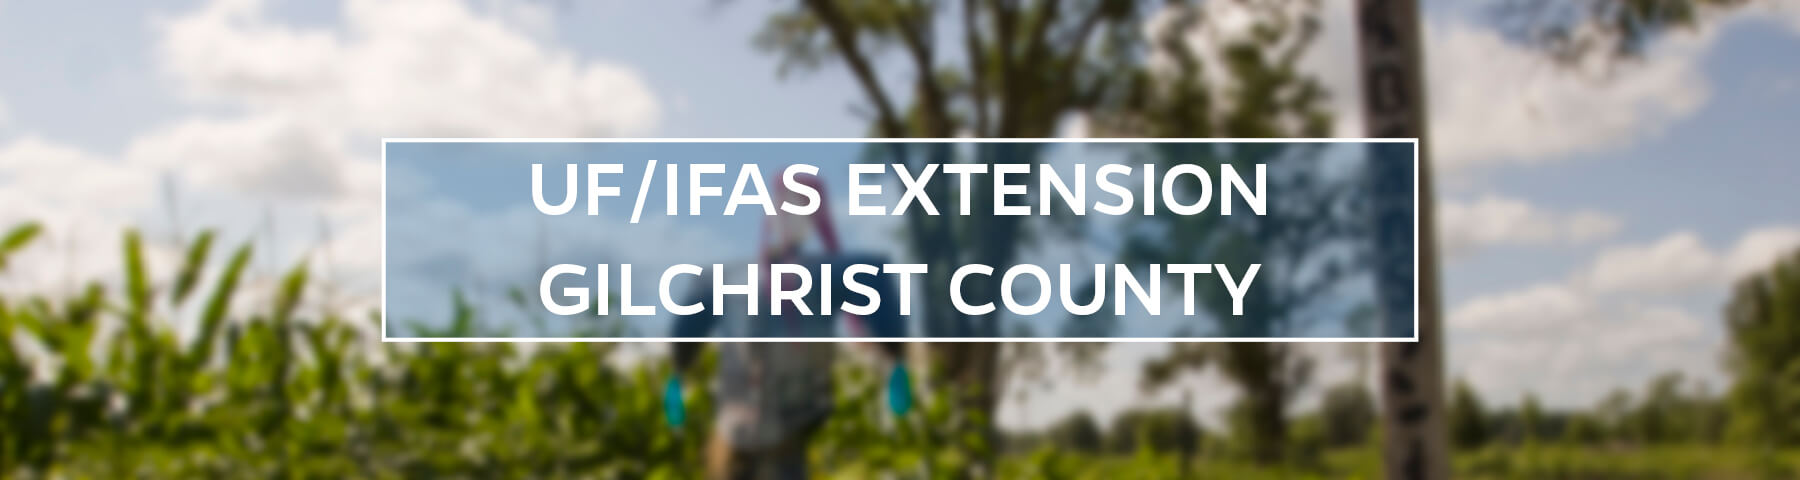 UF/IFAS Extension Gilchrist County